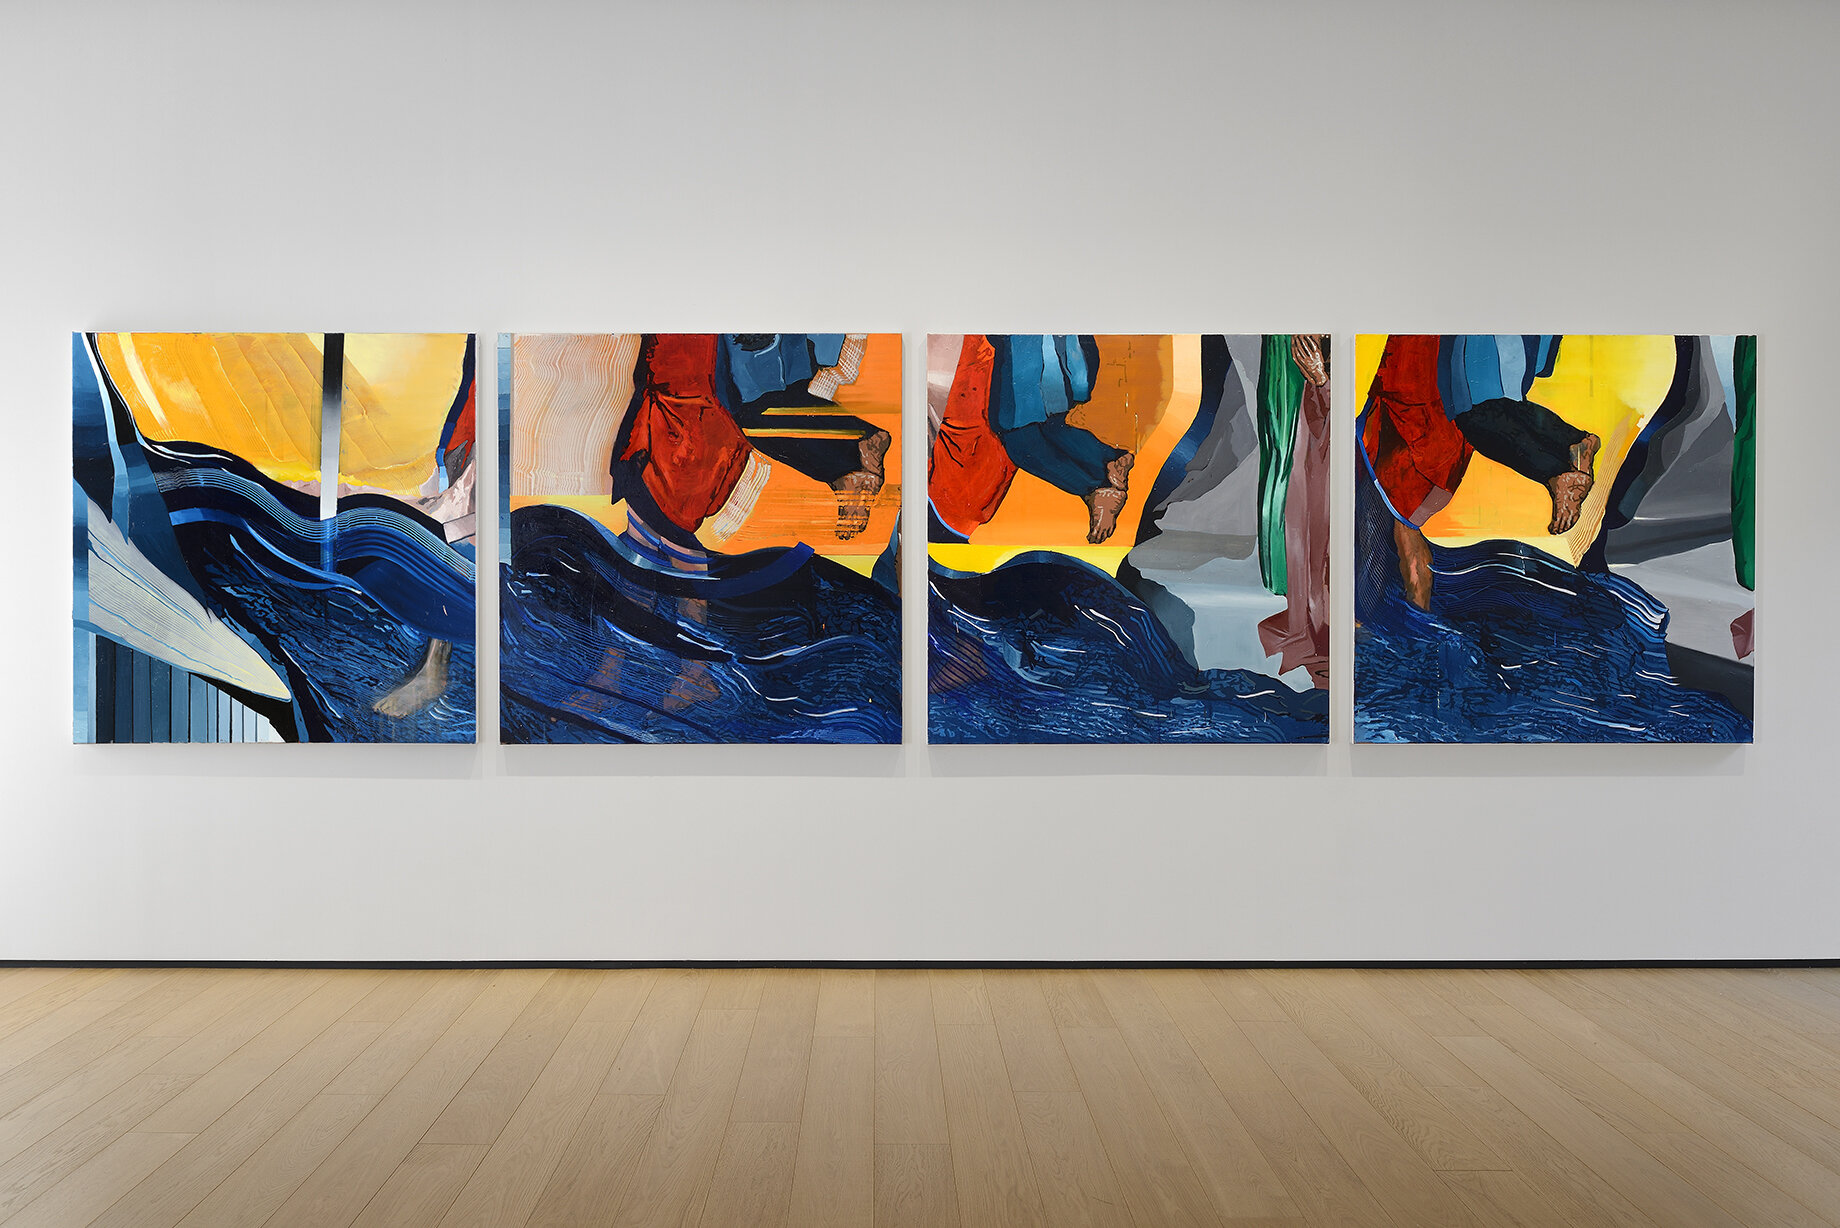 Crossing (2020), oil on canvas, 4 panels, 150x150 cm each